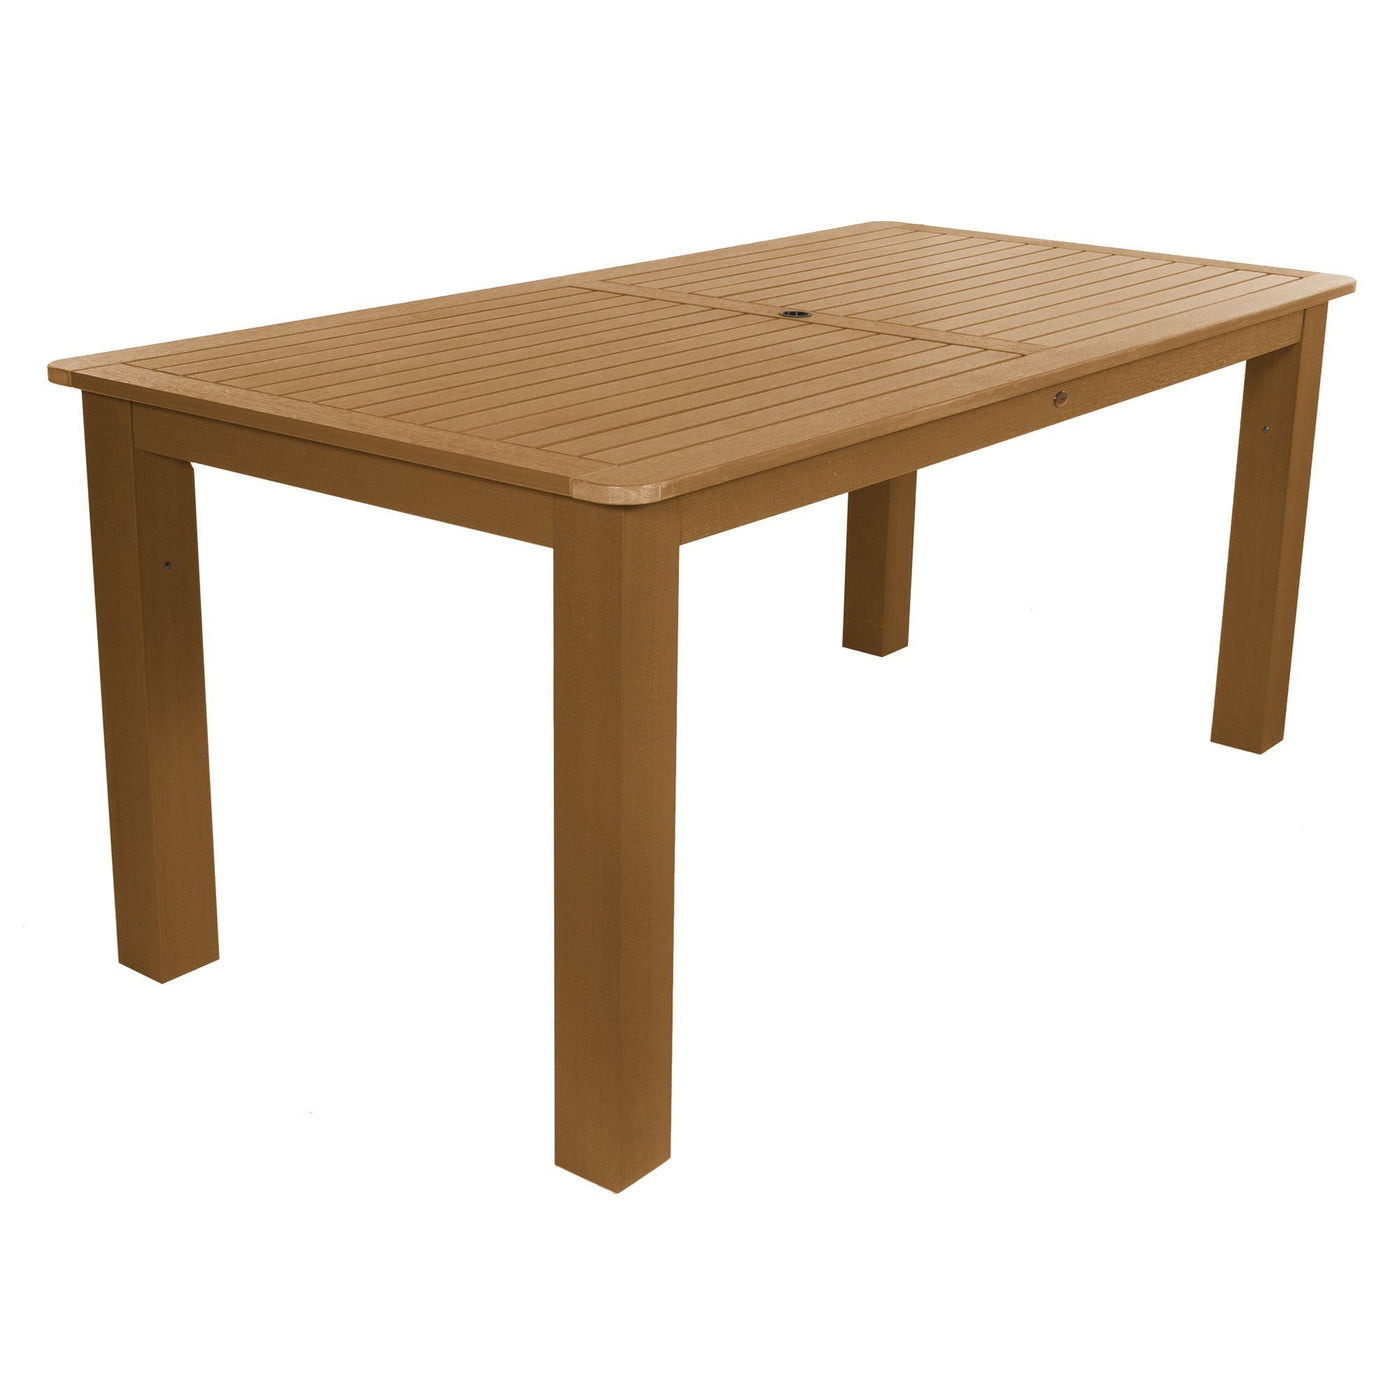 Rectangular 42in x 84in Oversized Dining Table - Counter Height Dining Highwood USA Toffee 